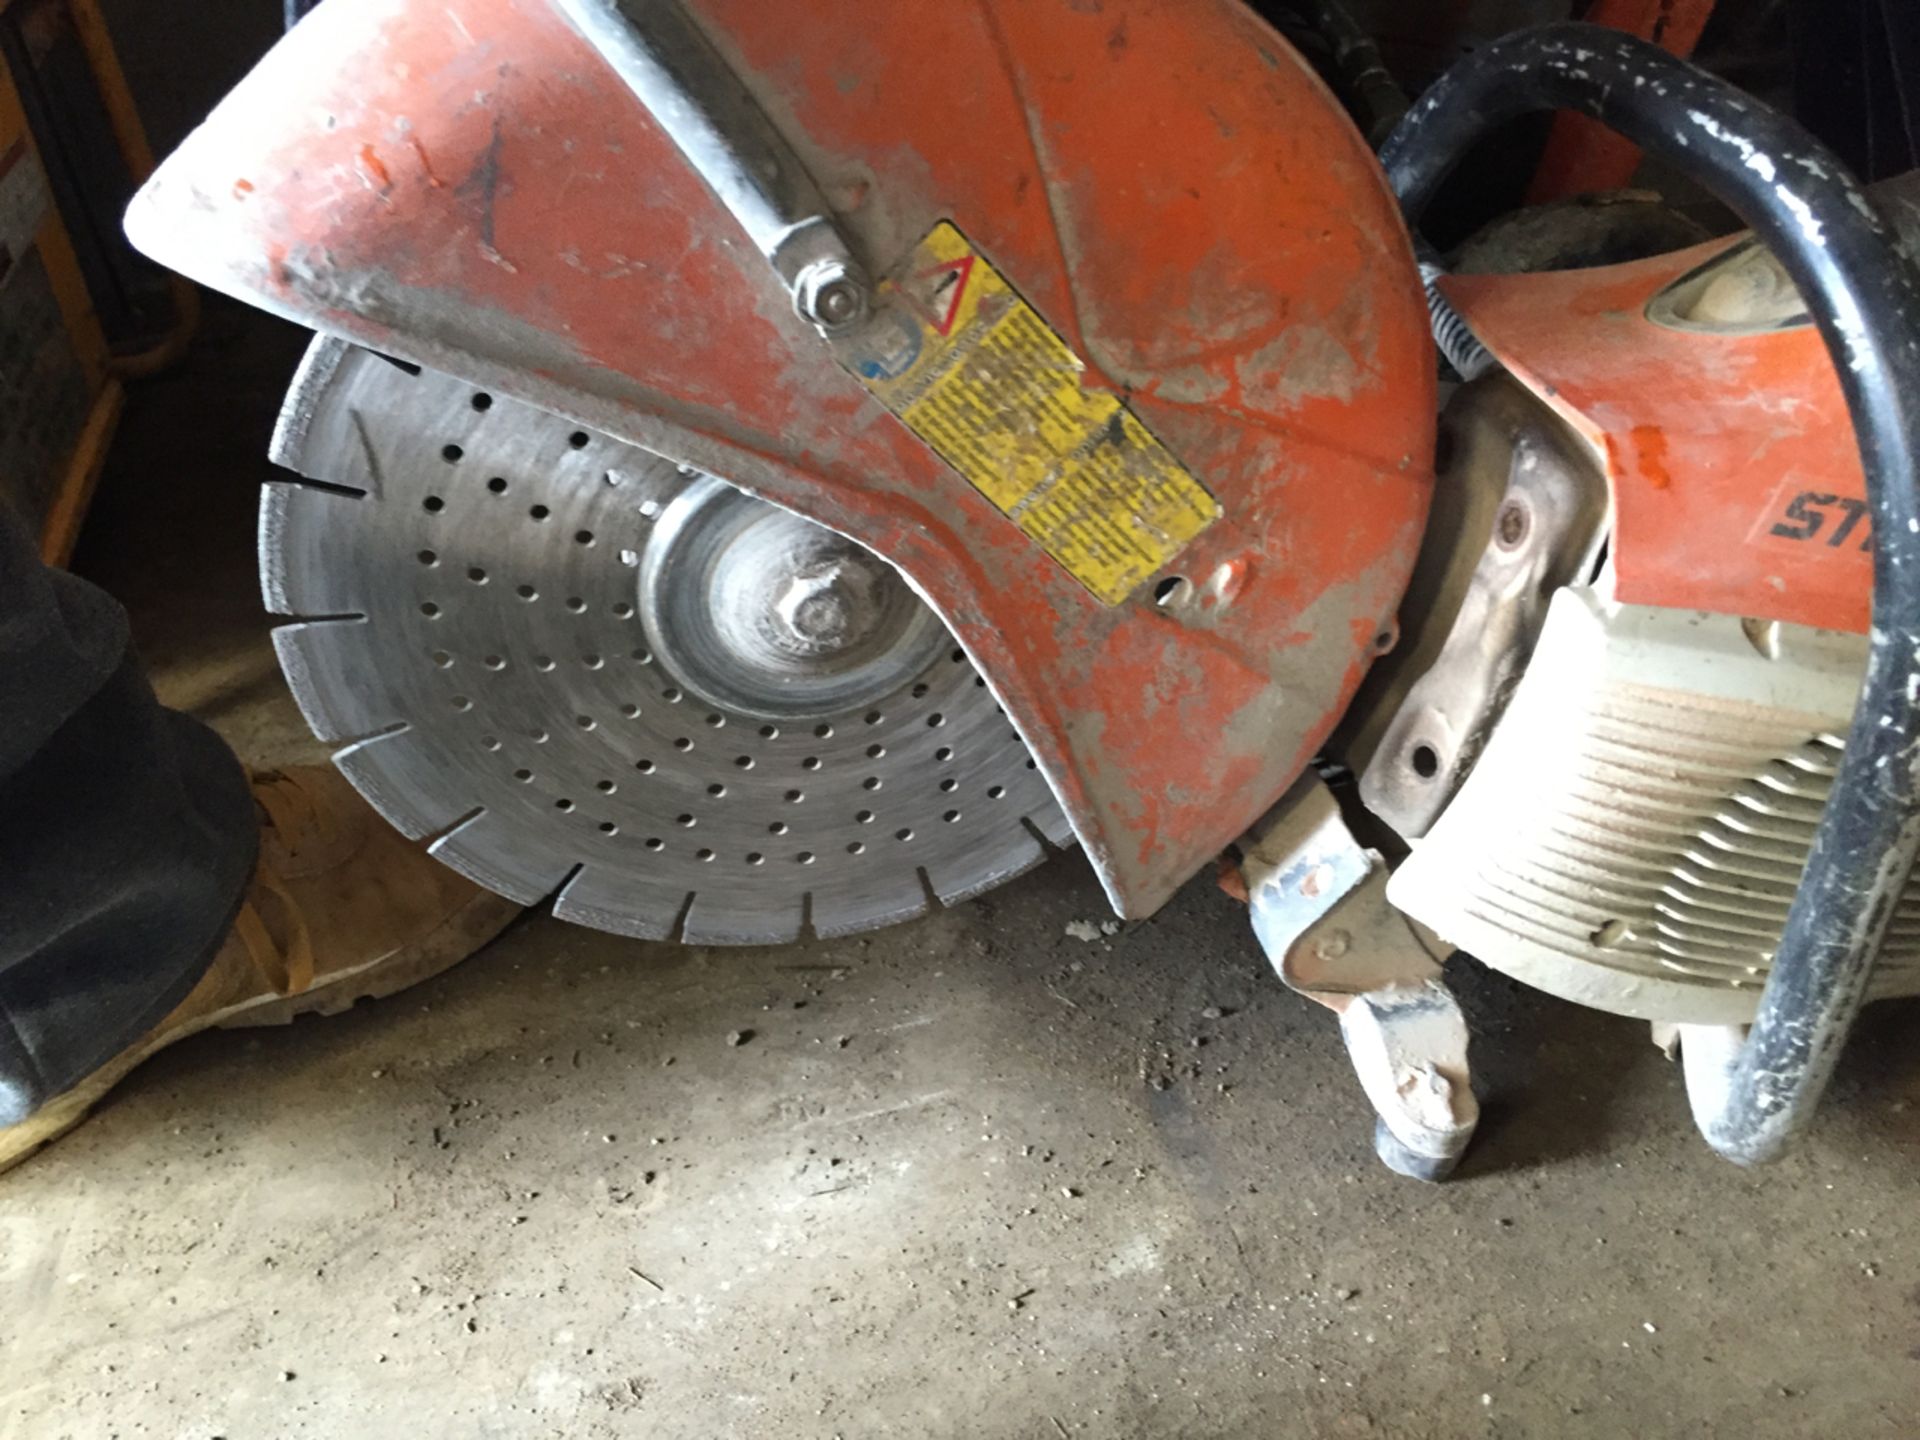 Stihl TS410 Petrol Saw - Fully working - No Reserve - Image 2 of 3